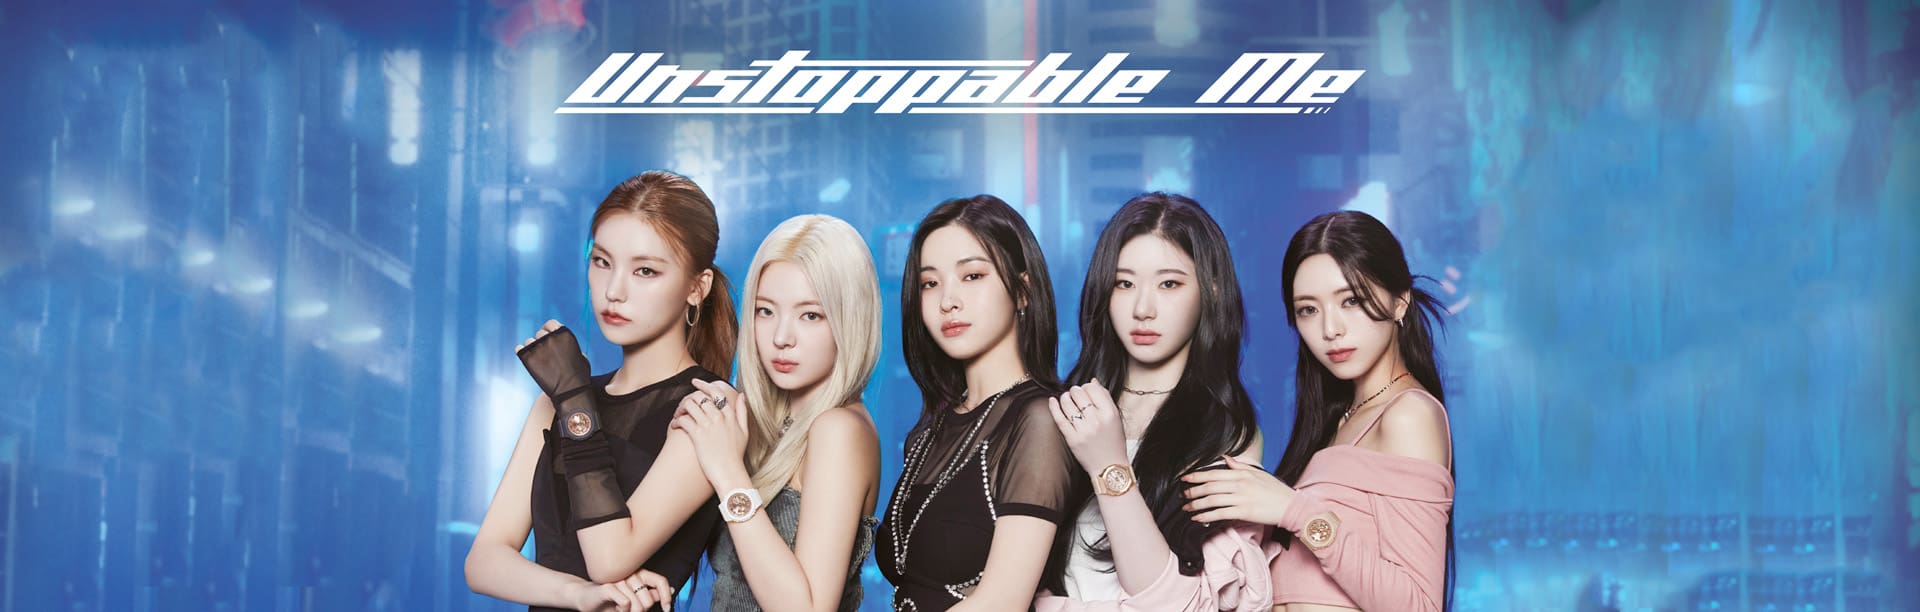 Unstoppable me, group of ITZY band members